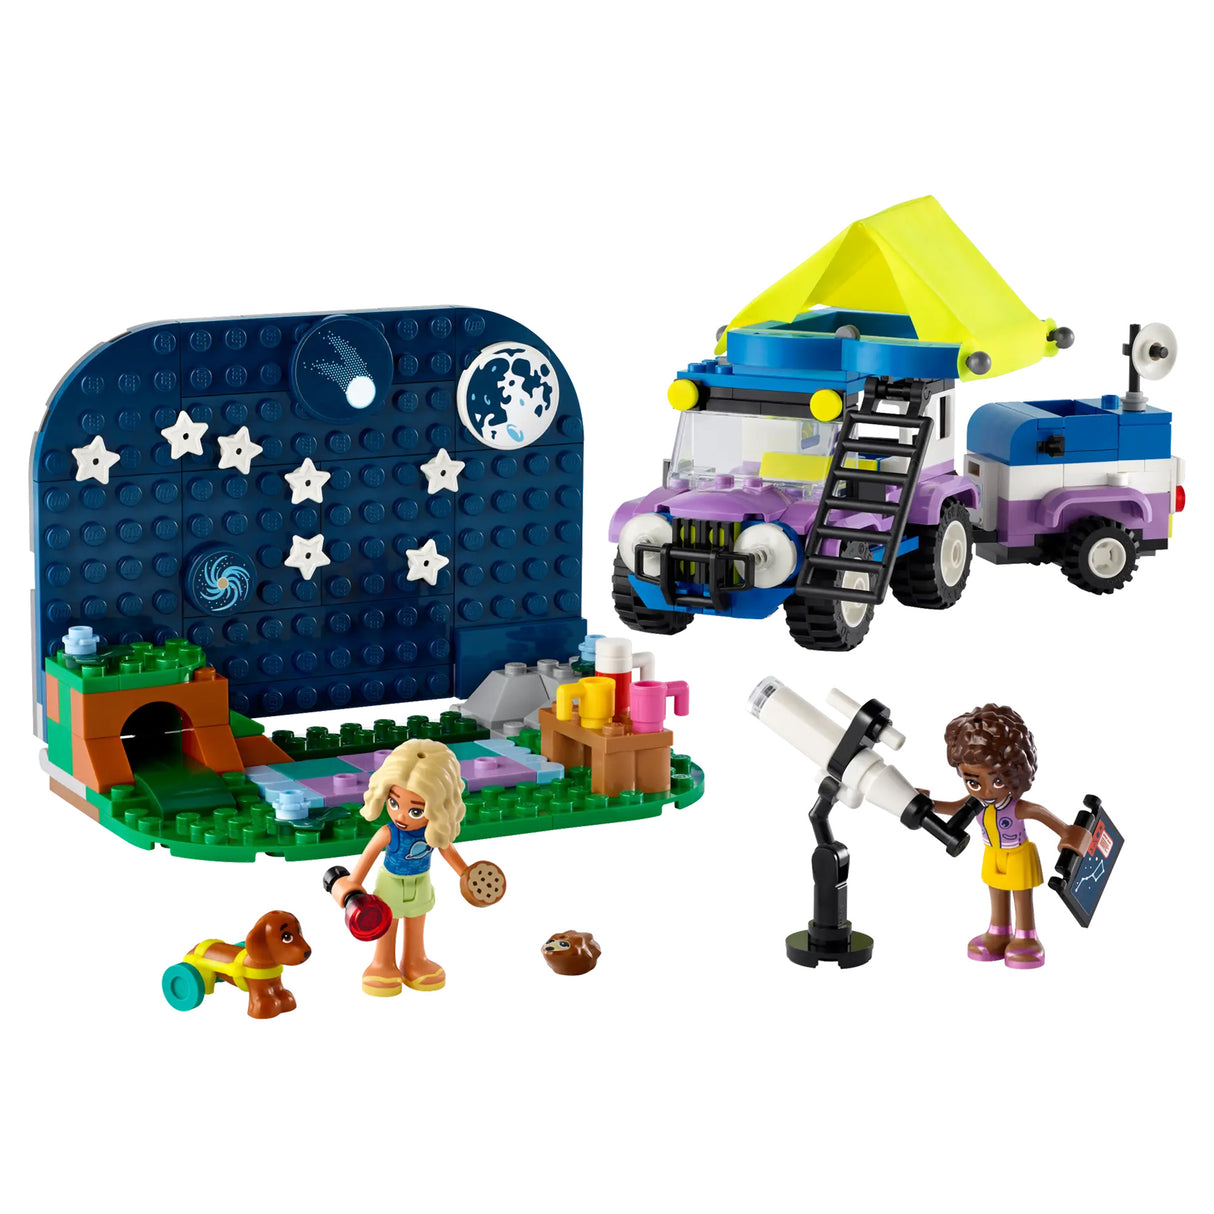 LEGO Friends Stargazing Camping Vehicle 42603, (364-pieces)